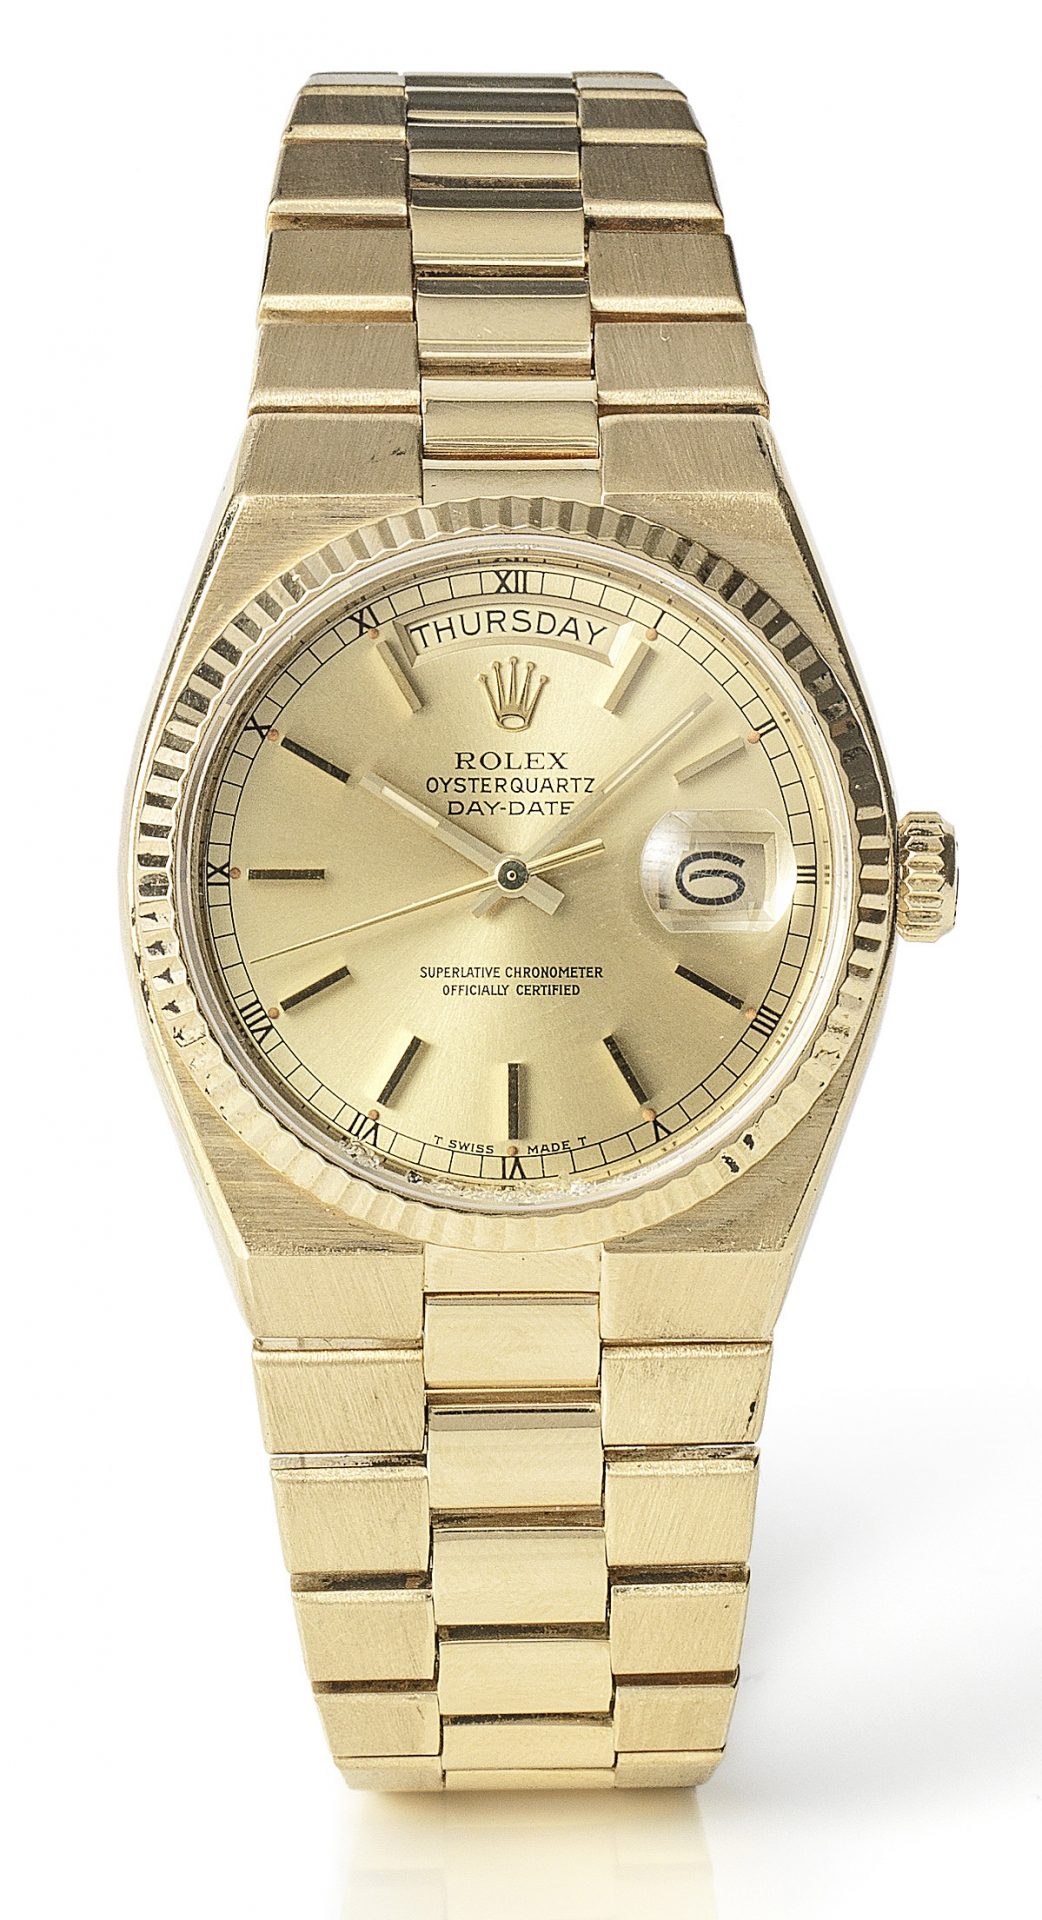 Sir Michael Caine’s gold UK luxury replica Rolex sells for £125,000